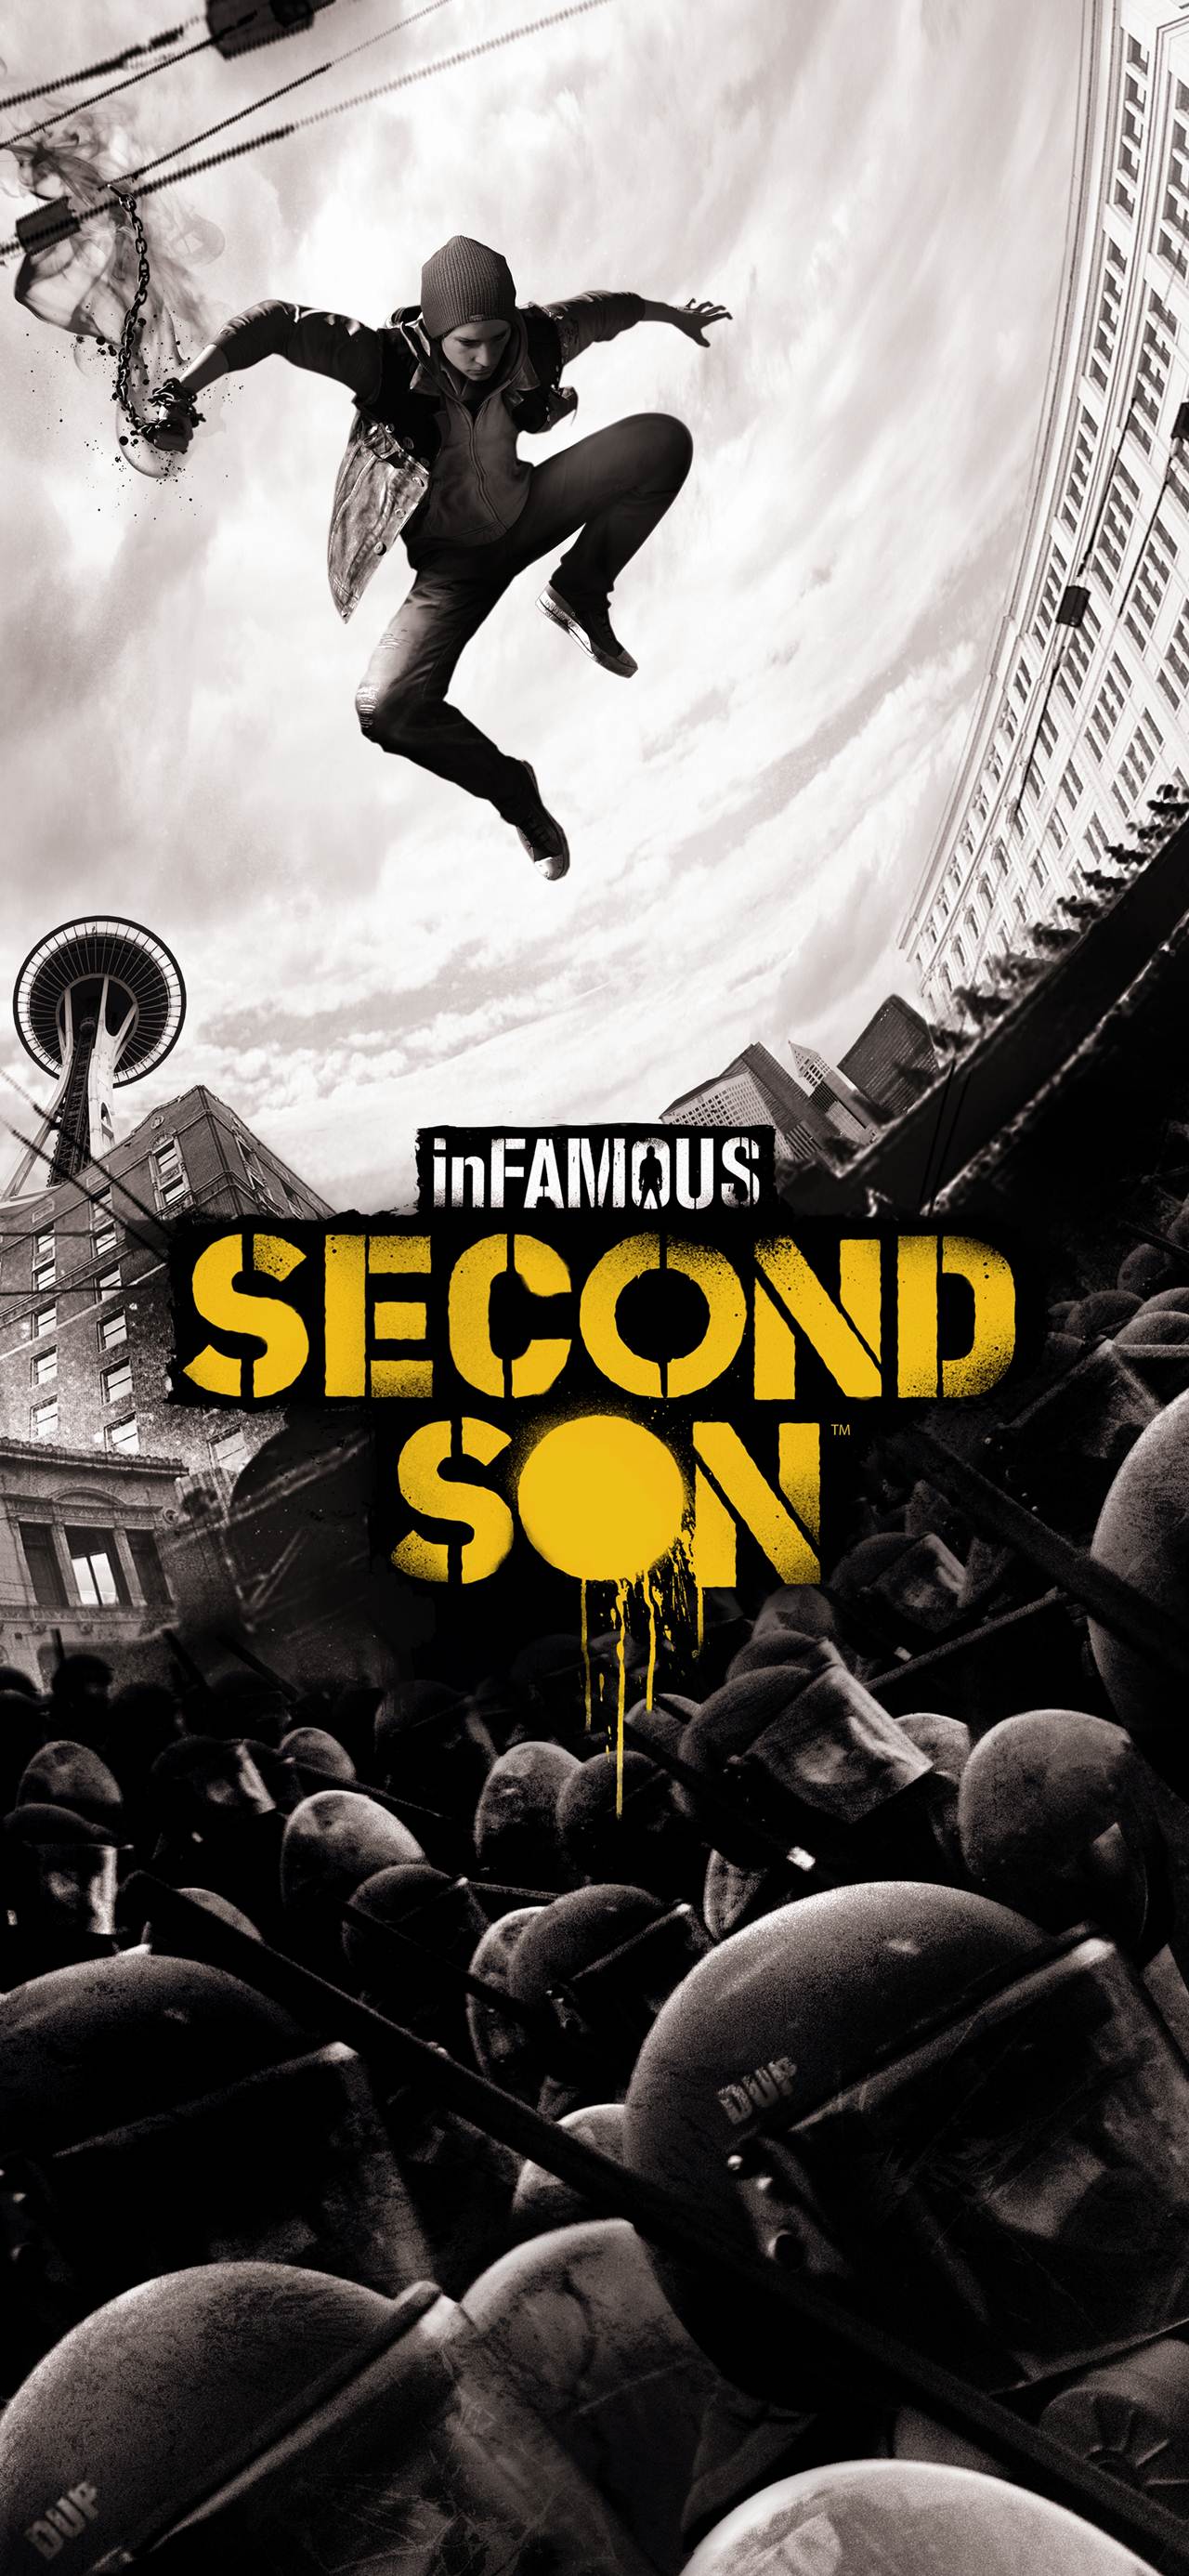 infamous second son wallpaper « Video Game News, Reviews